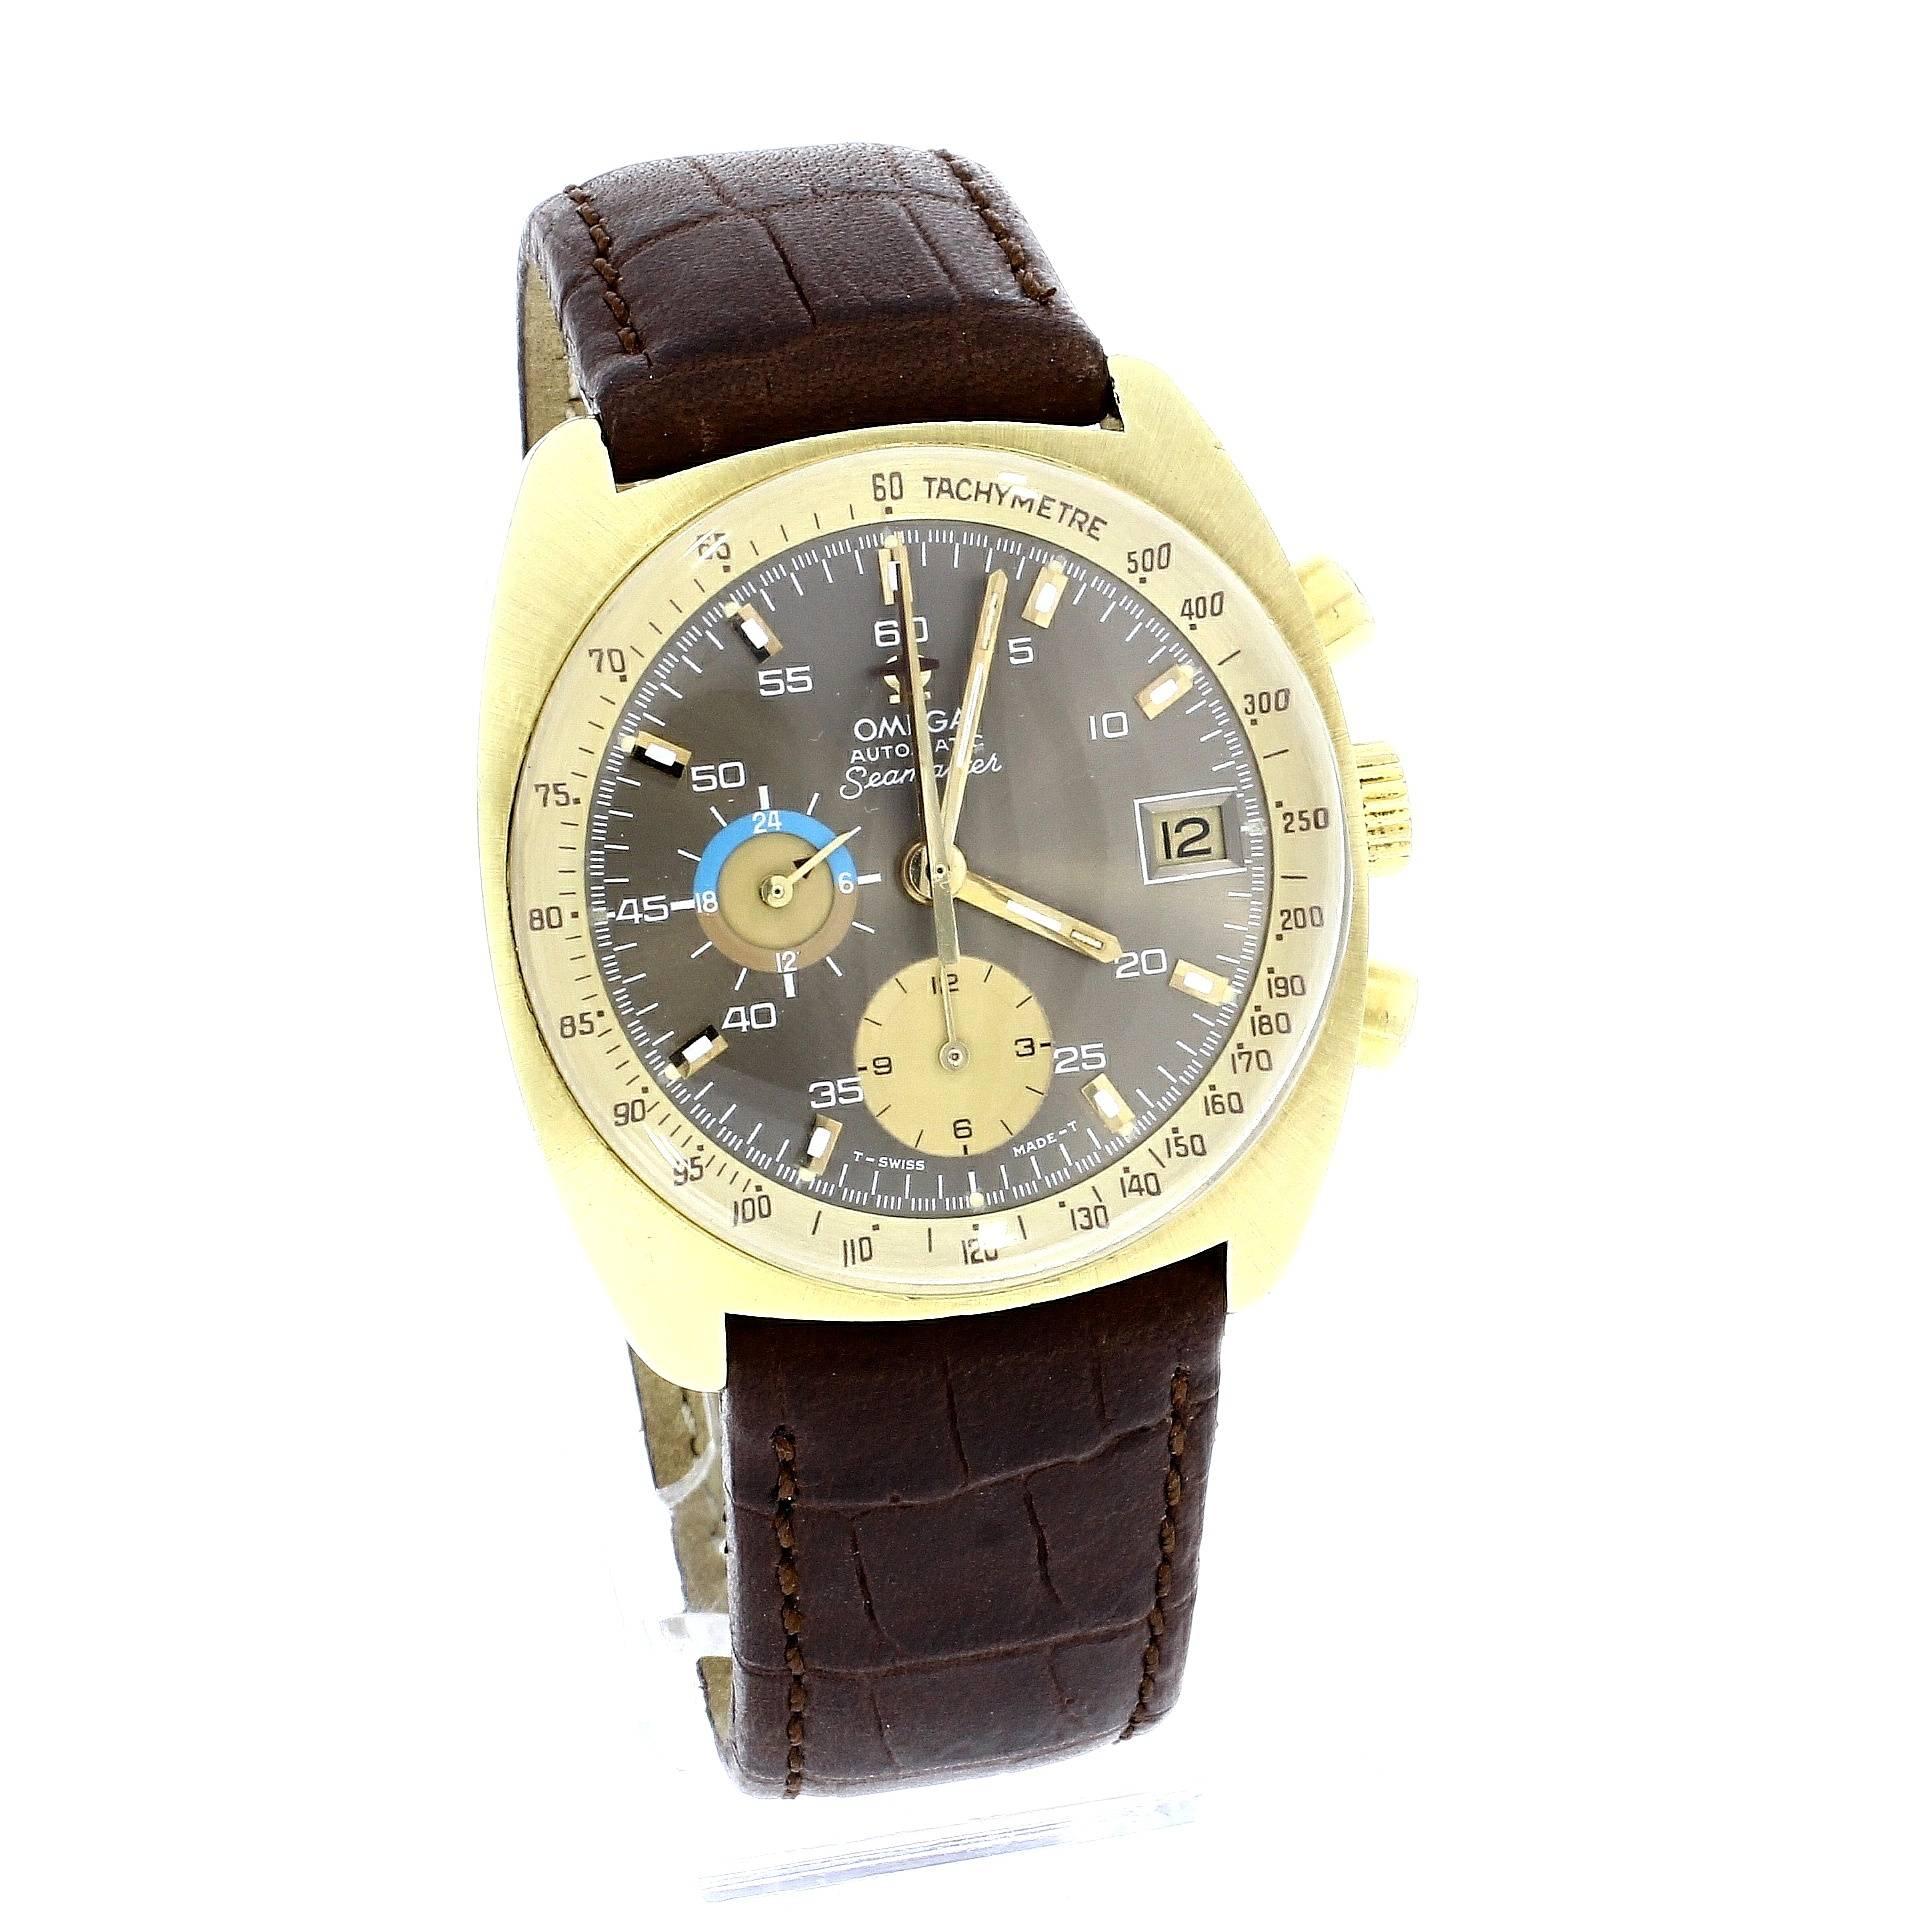 Omega Gold Plated Seamaster Chronograph Wristwatch Ref 176.007 For Sale 3